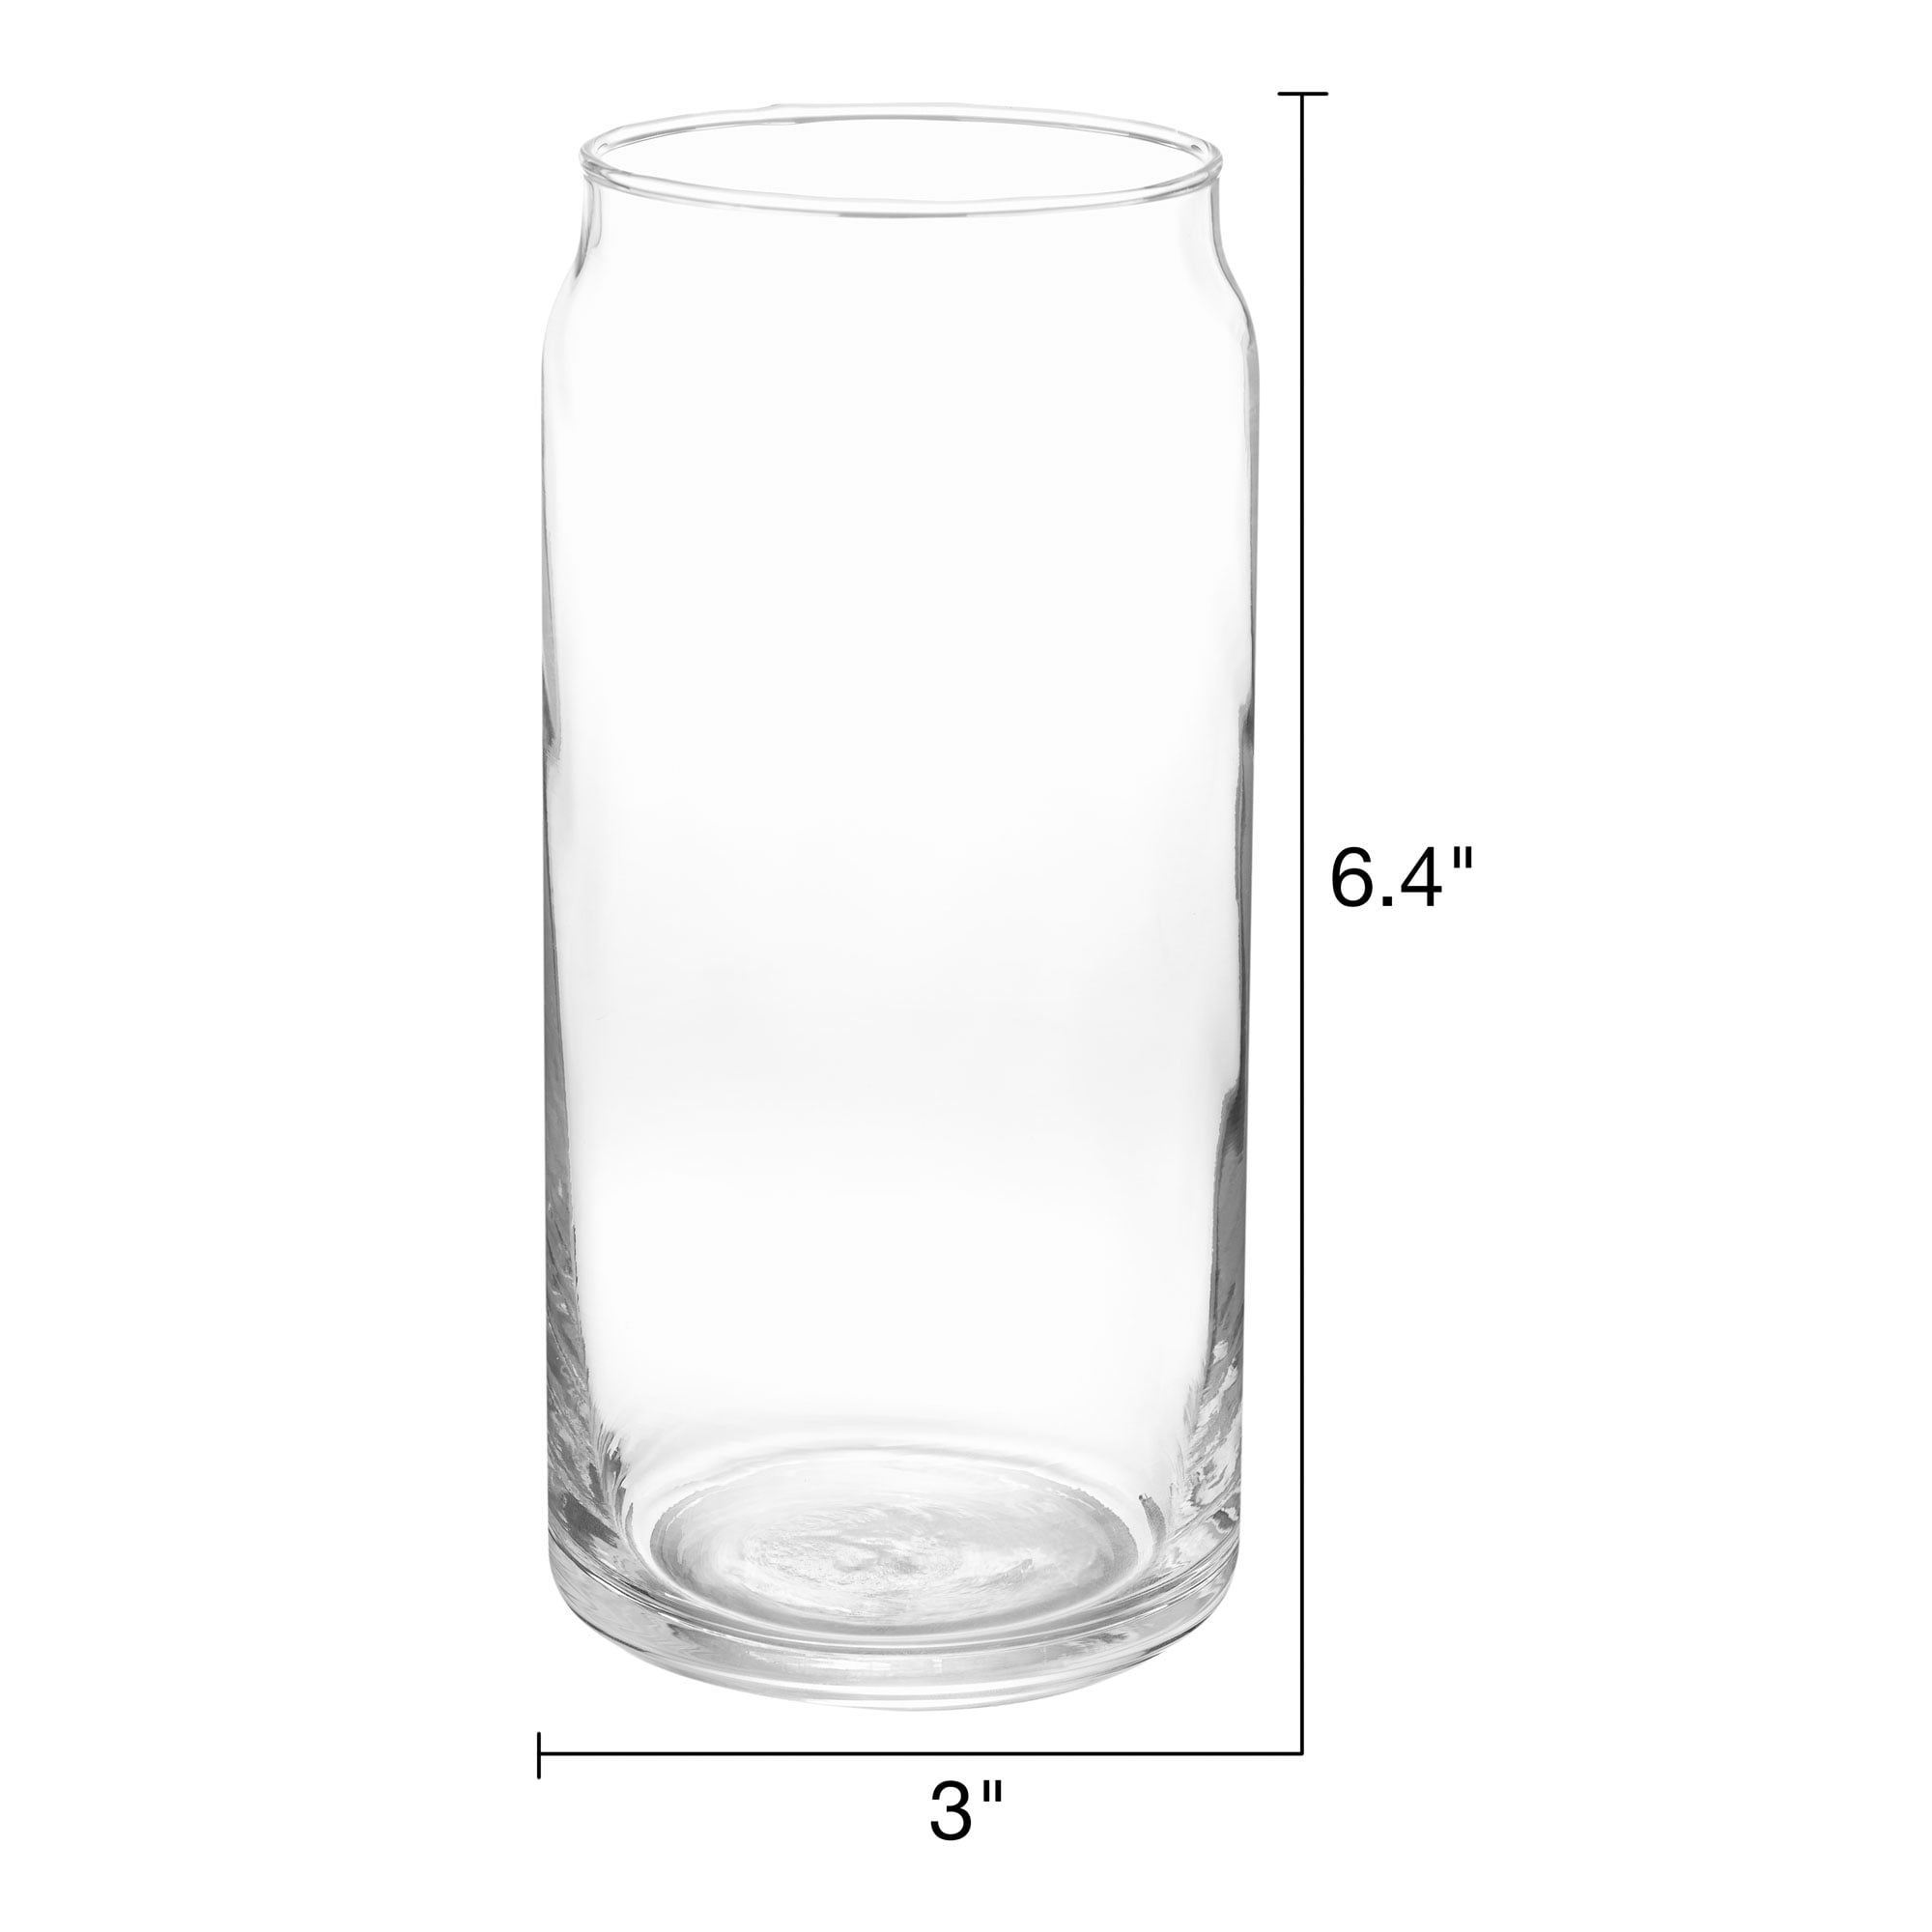 20 oz Can Shaped Beer Glasses Elegant Shaped Drinking Glasses Is Ideal Gift,Tumbler Beer Glasses Great, A1, Size: One Size